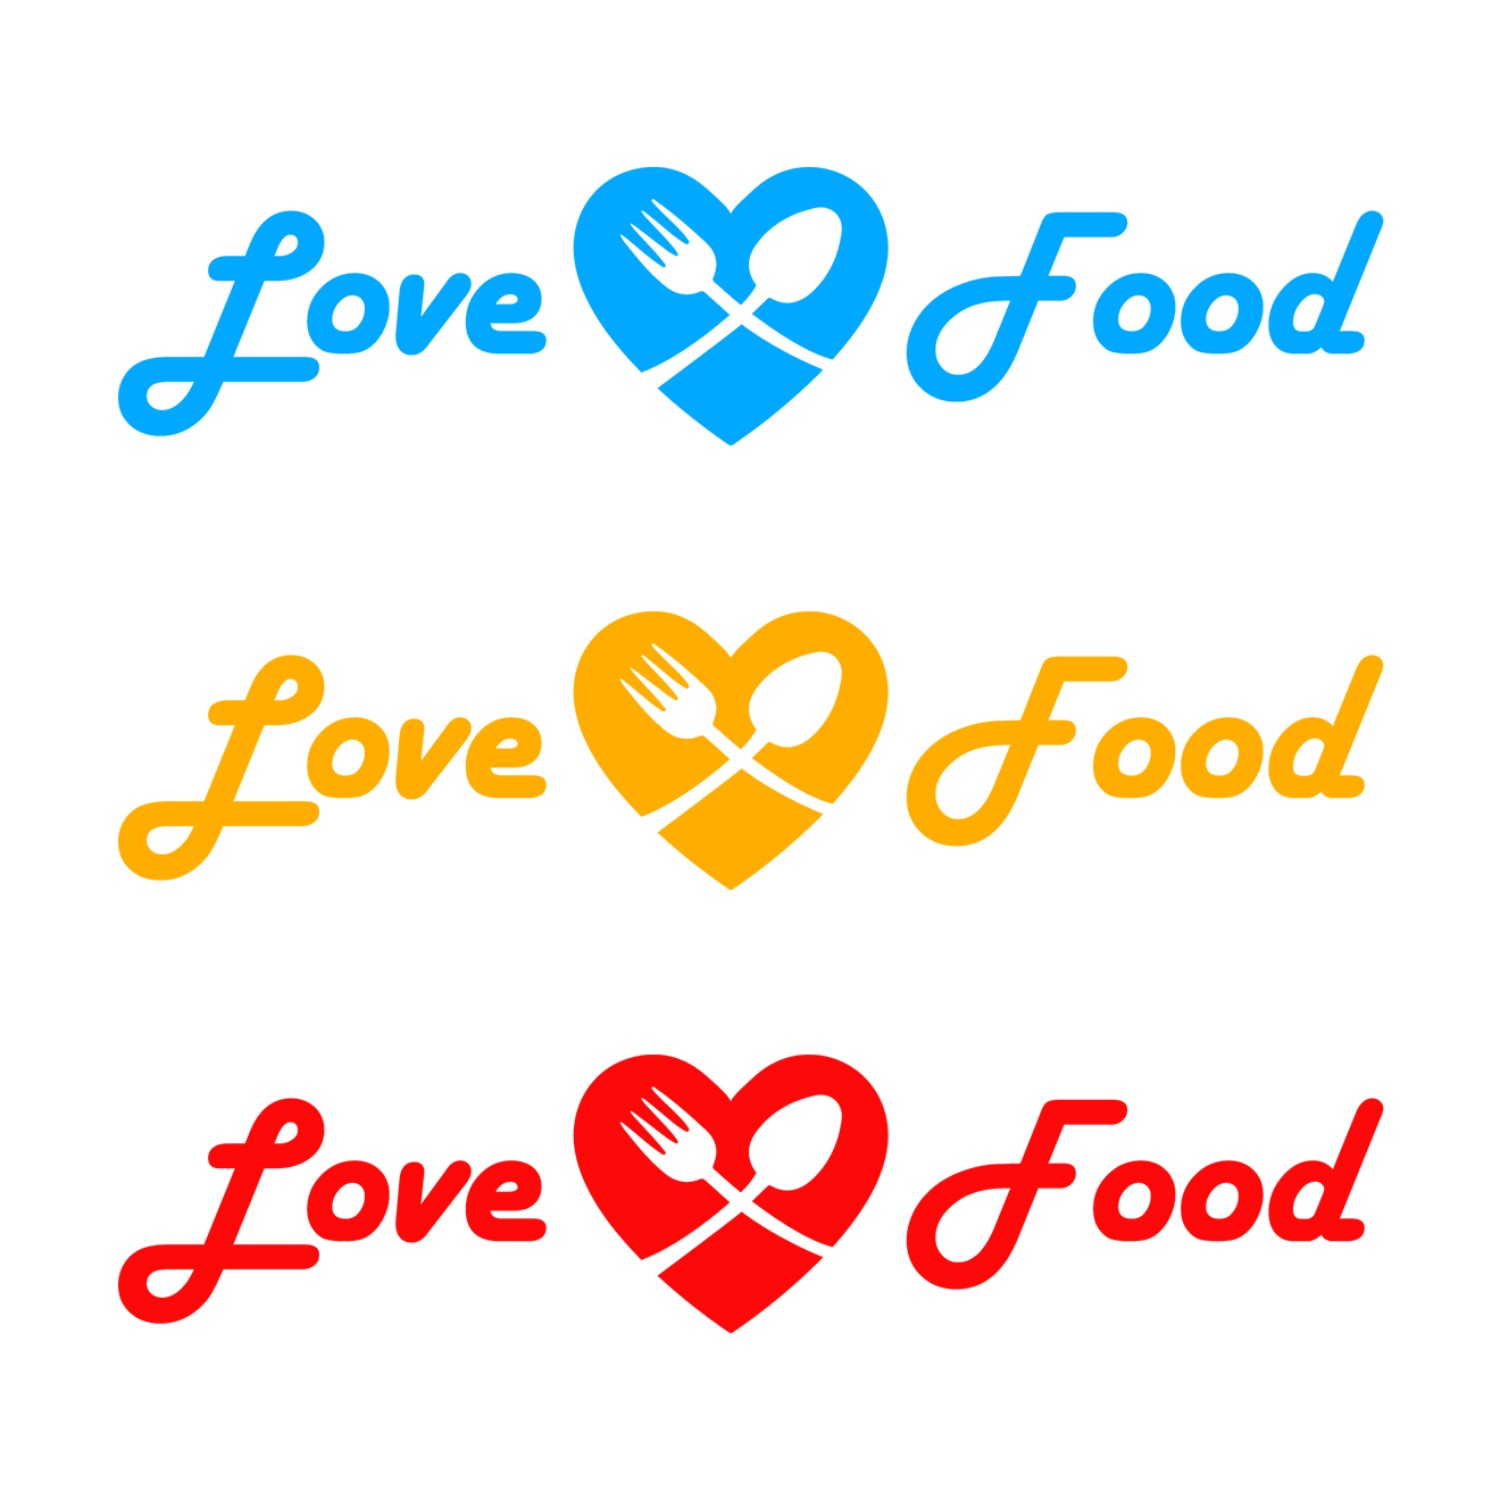 Food Love Vector Logo Design Template cover image.